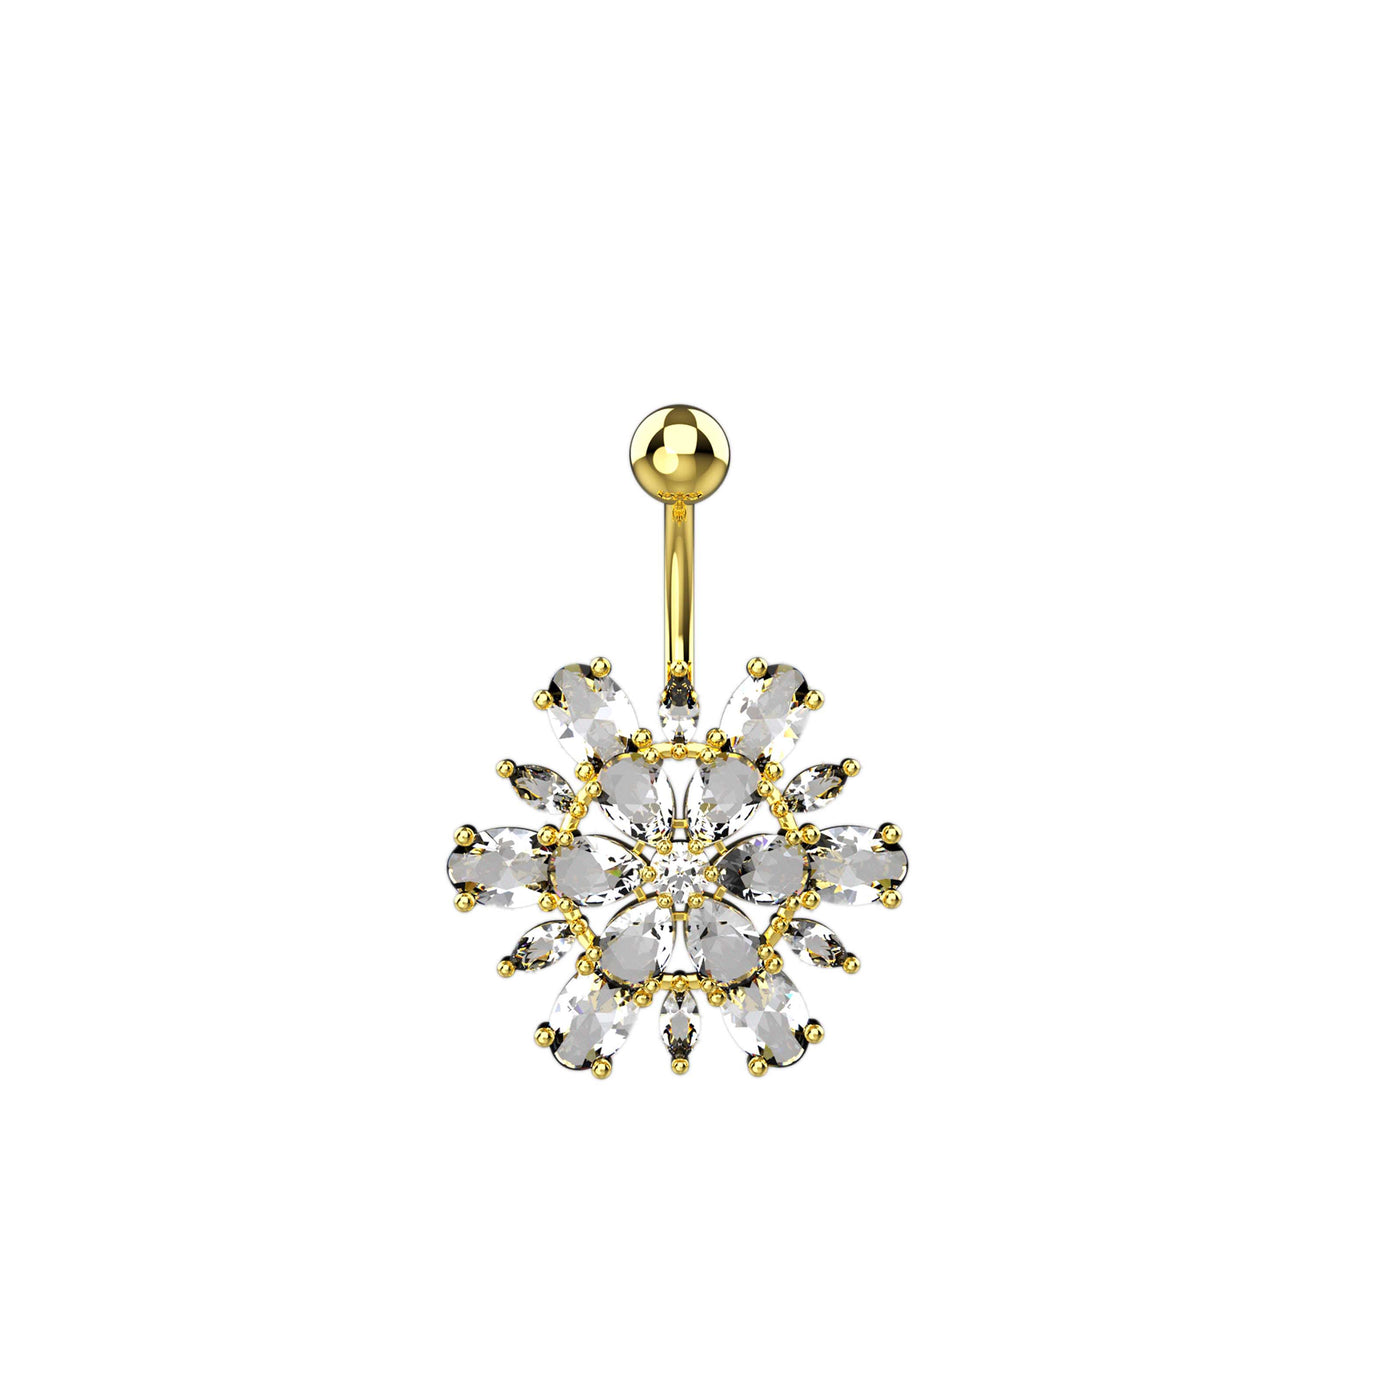 Flower Shaped Silver Belly Button Ring